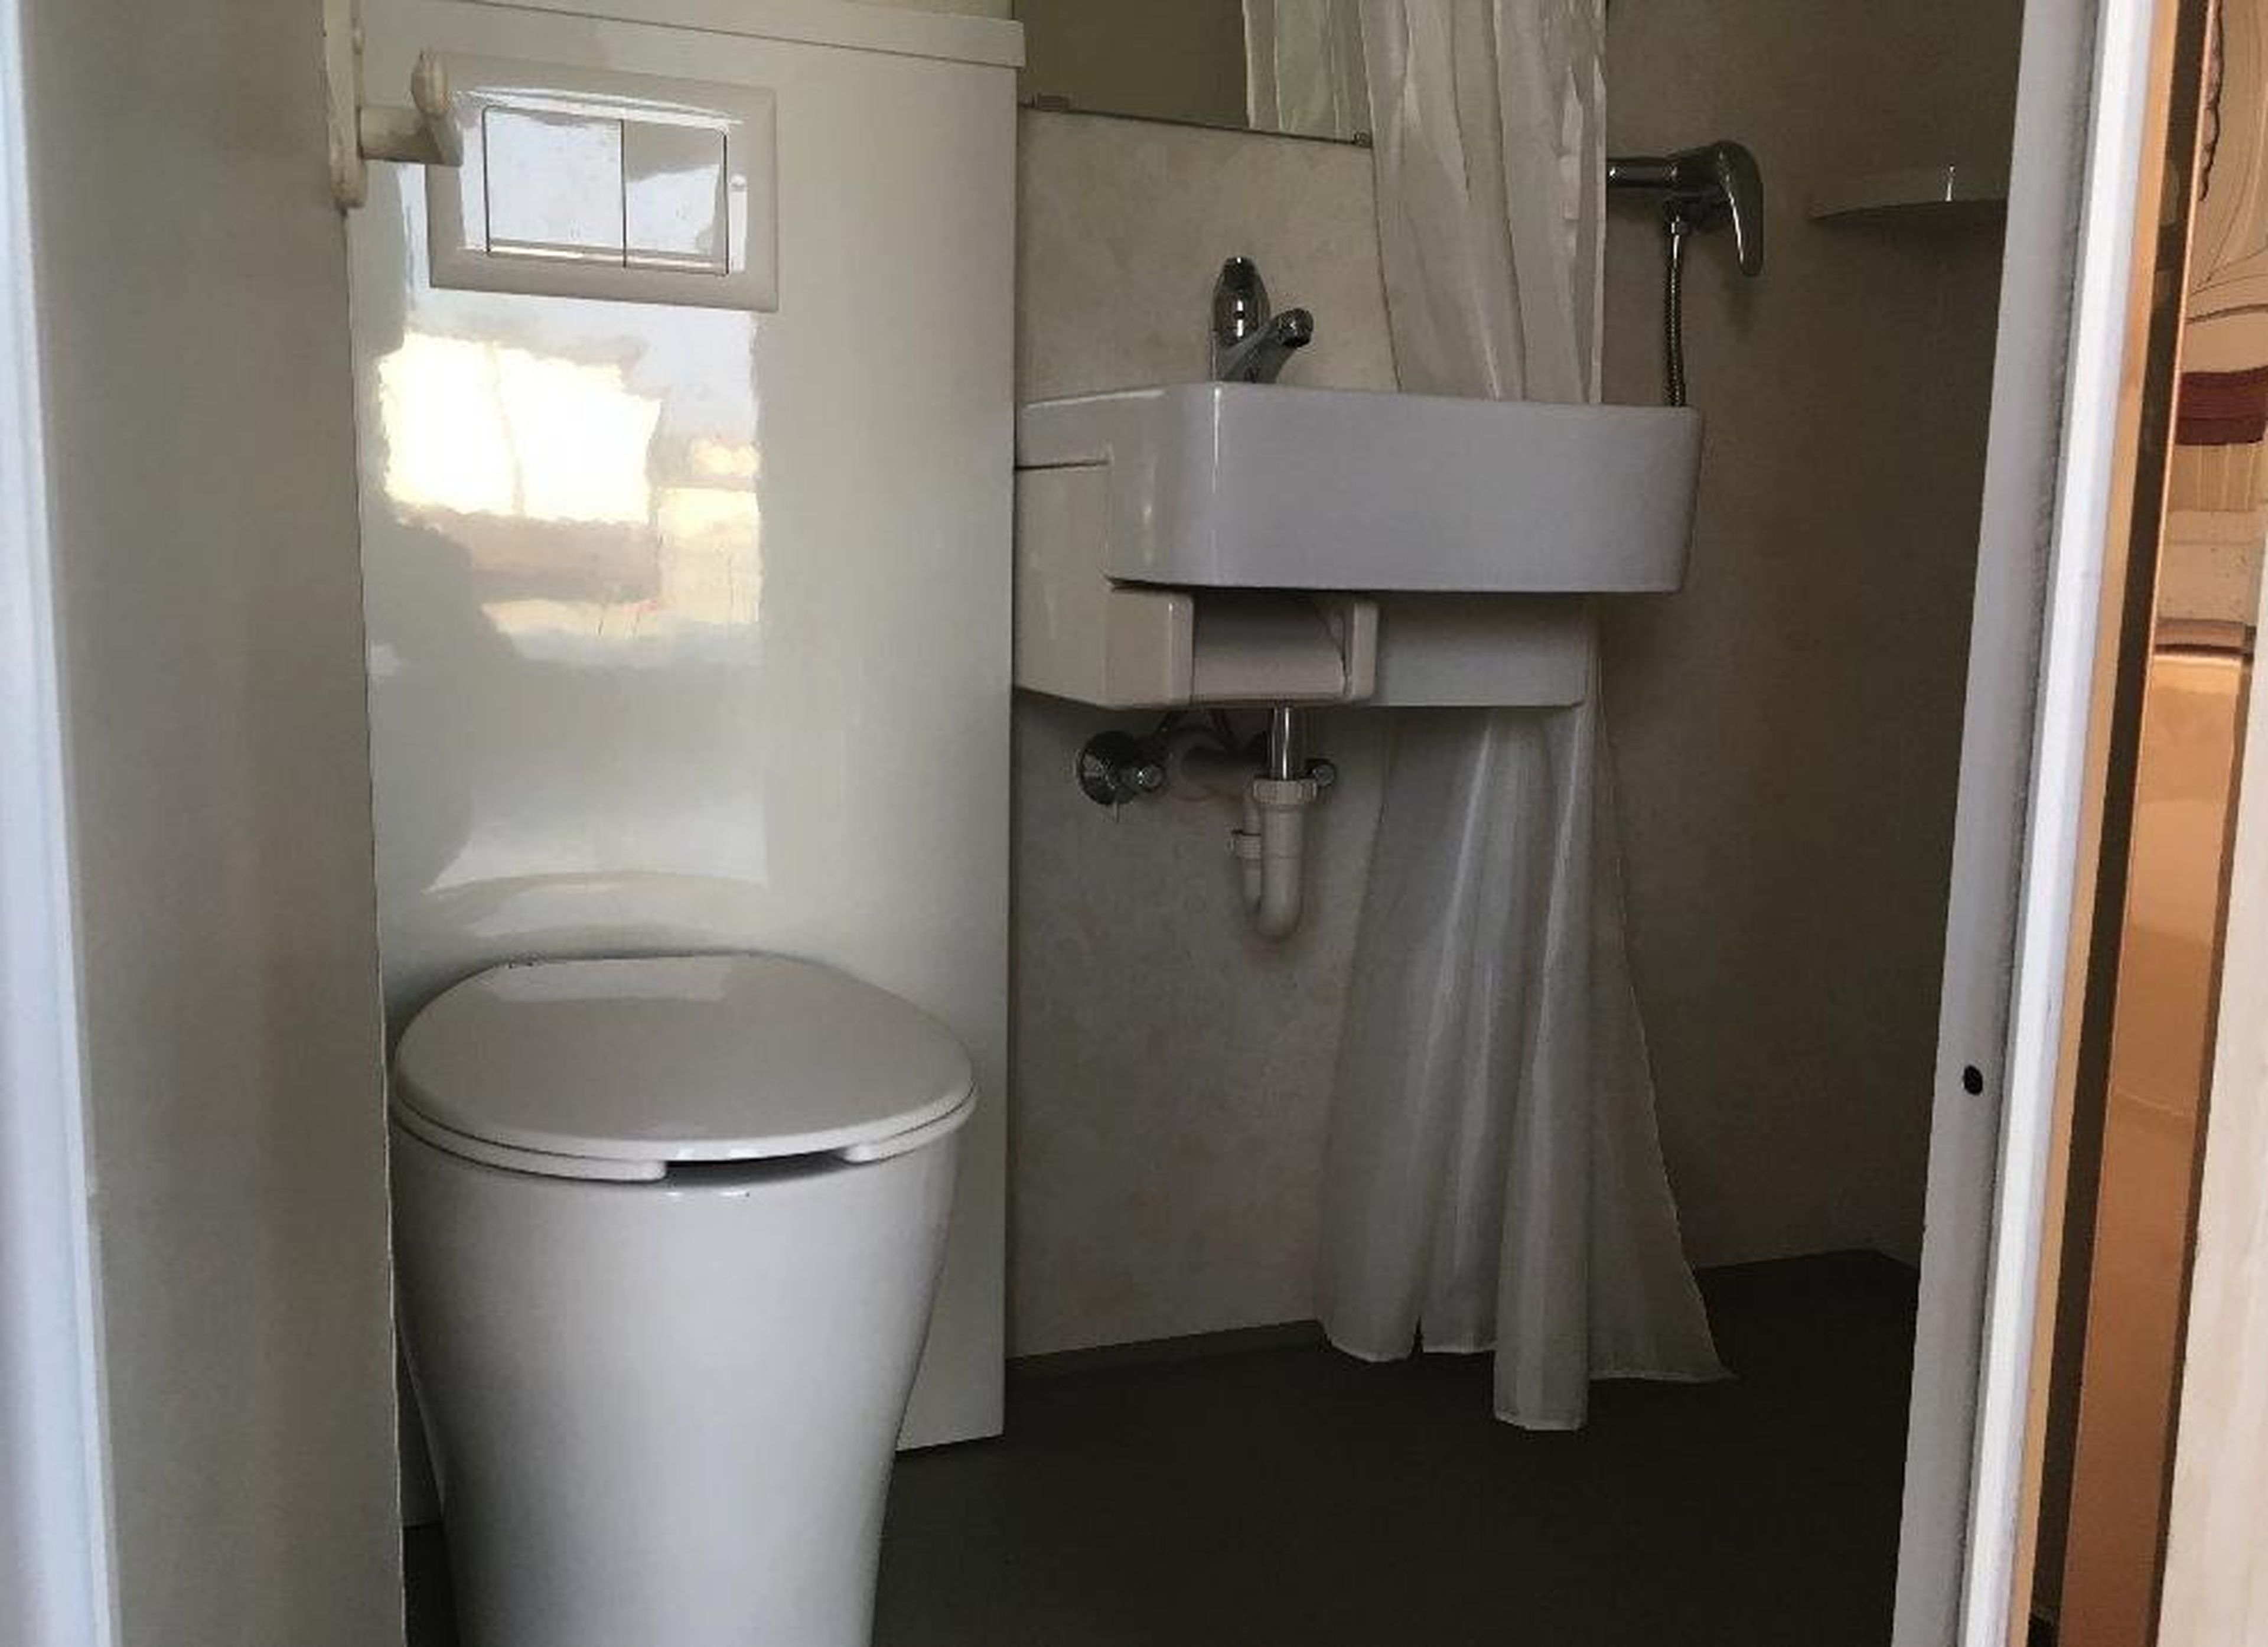 The bathroom has a toilet and a sink.